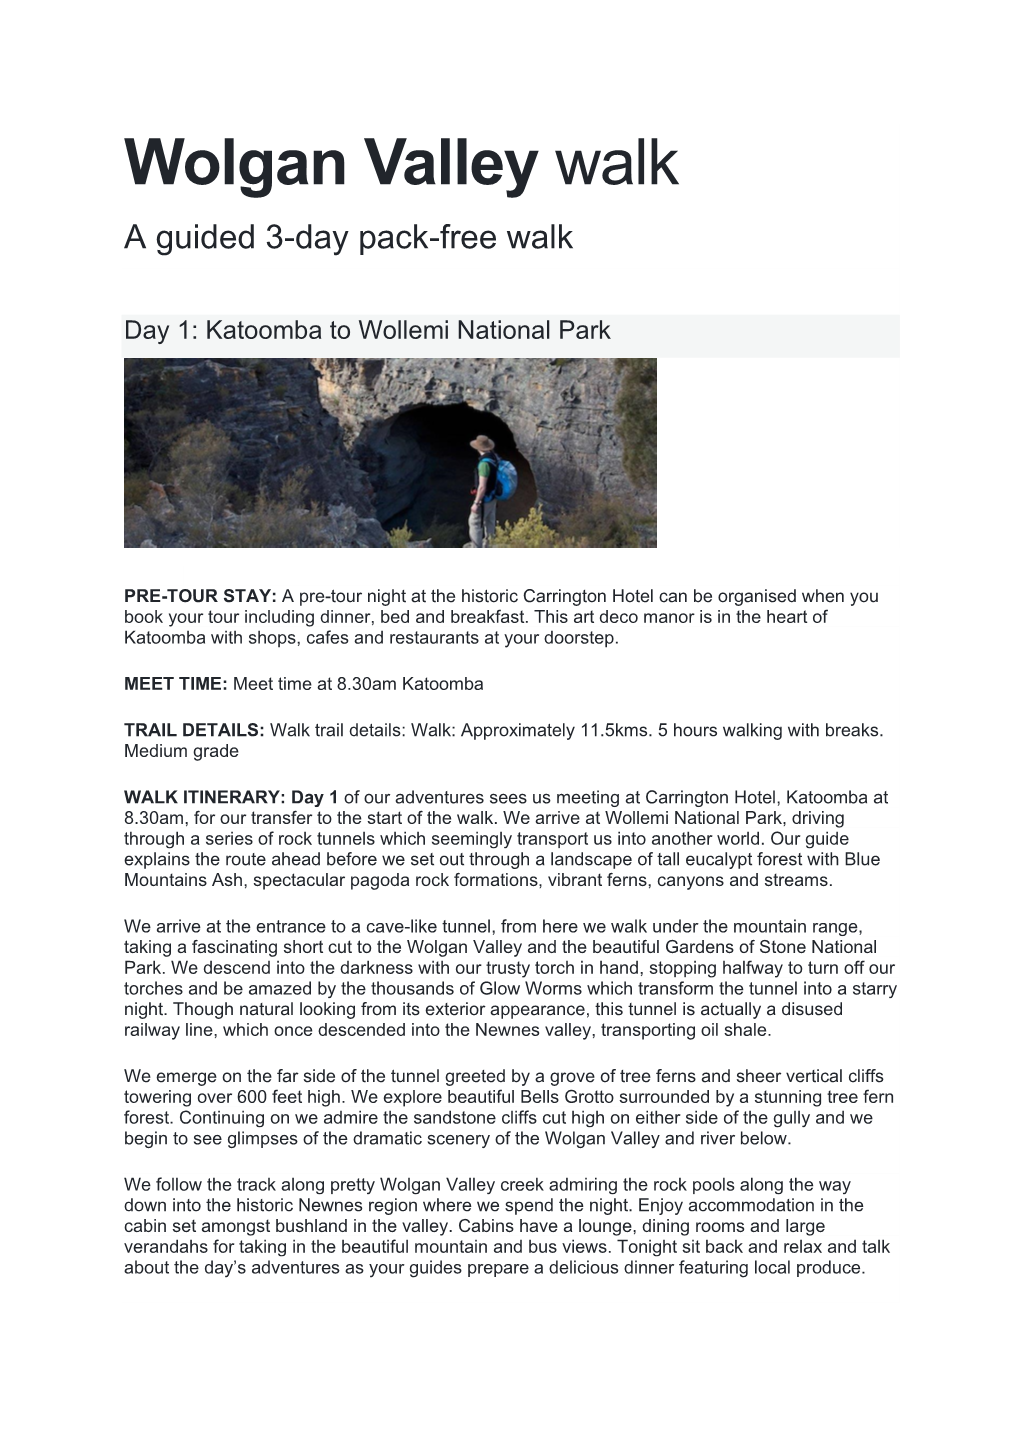 Wolgan Valley Walk a Guided 3-Day Pack-Free Walk